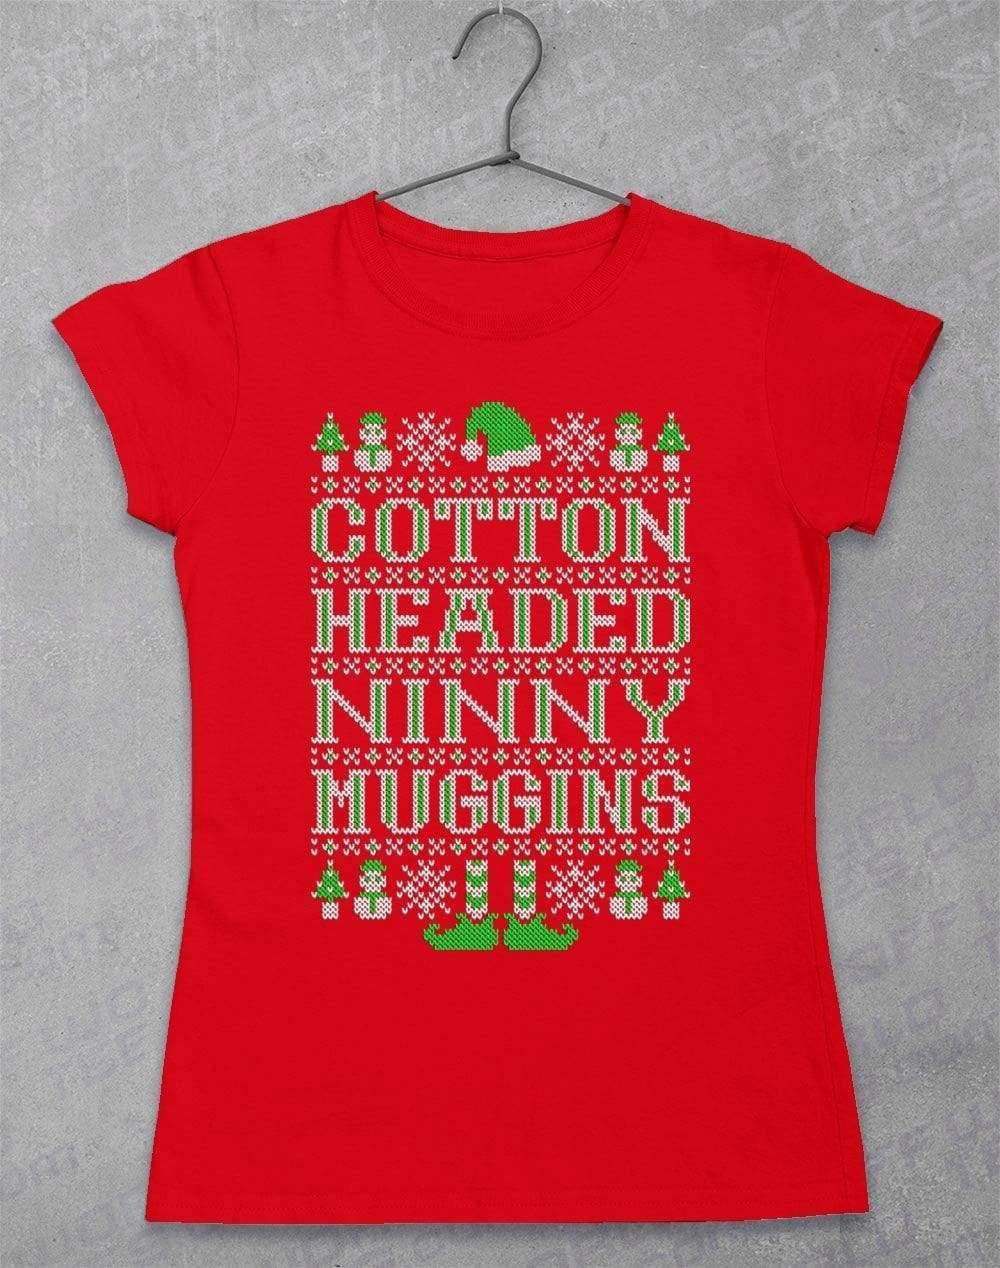 Cotton Headed Ninny Muggins Festive Knitted-Look Women's T-Shirt 8-10 / Red  - Off World Tees